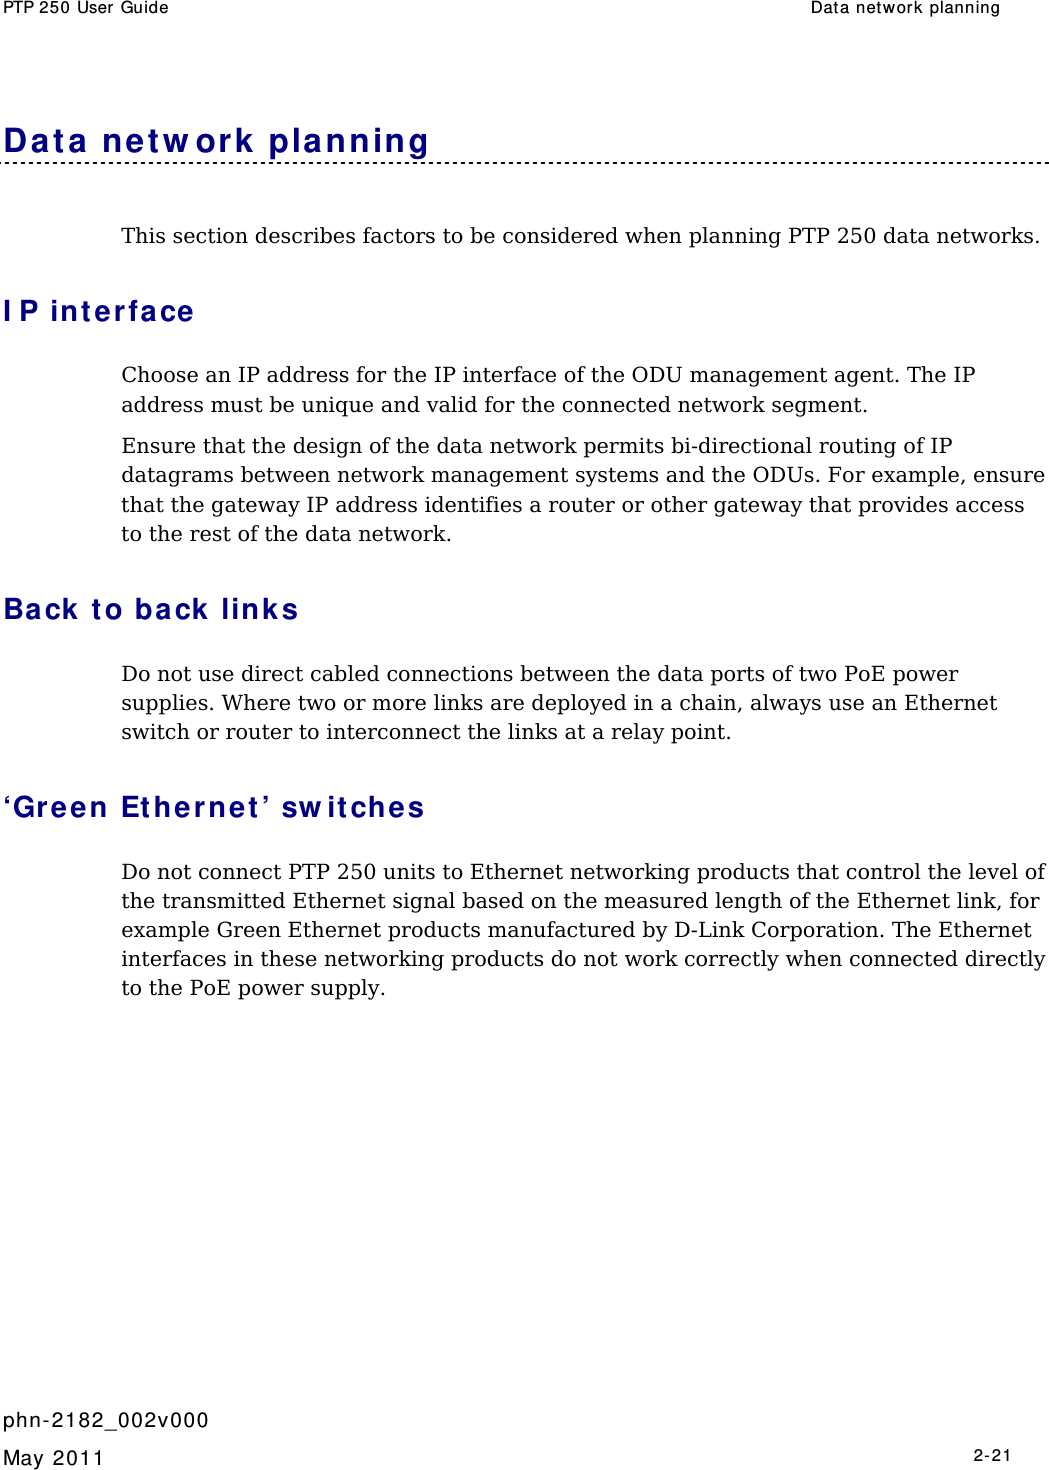 PTP 250 User Guide  Dat a network planning   phn- 2182_002v000   May 2011   2-21  Da t a ne t w ork  planning This section describes factors to be considered when planning PTP 250 data networks. I P int erfa ce Choose an IP address for the IP interface of the ODU management agent. The IP address must be unique and valid for the connected network segment. Ensure that the design of the data network permits bi-directional routing of IP datagrams between network management systems and the ODUs. For example, ensure that the gateway IP address identifies a router or other gateway that provides access to the rest of the data network. Back t o back link s Do not use direct cabled connections between the data ports of two PoE power supplies. Where two or more links are deployed in a chain, always use an Ethernet switch or router to interconnect the links at a relay point. ‘Green Et hernet ’ sw it ches Do not connect PTP 250 units to Ethernet networking products that control the level of the transmitted Ethernet signal based on the measured length of the Ethernet link, for example Green Ethernet products manufactured by D-Link Corporation. The Ethernet interfaces in these networking products do not work correctly when connected directly to the PoE power supply. 